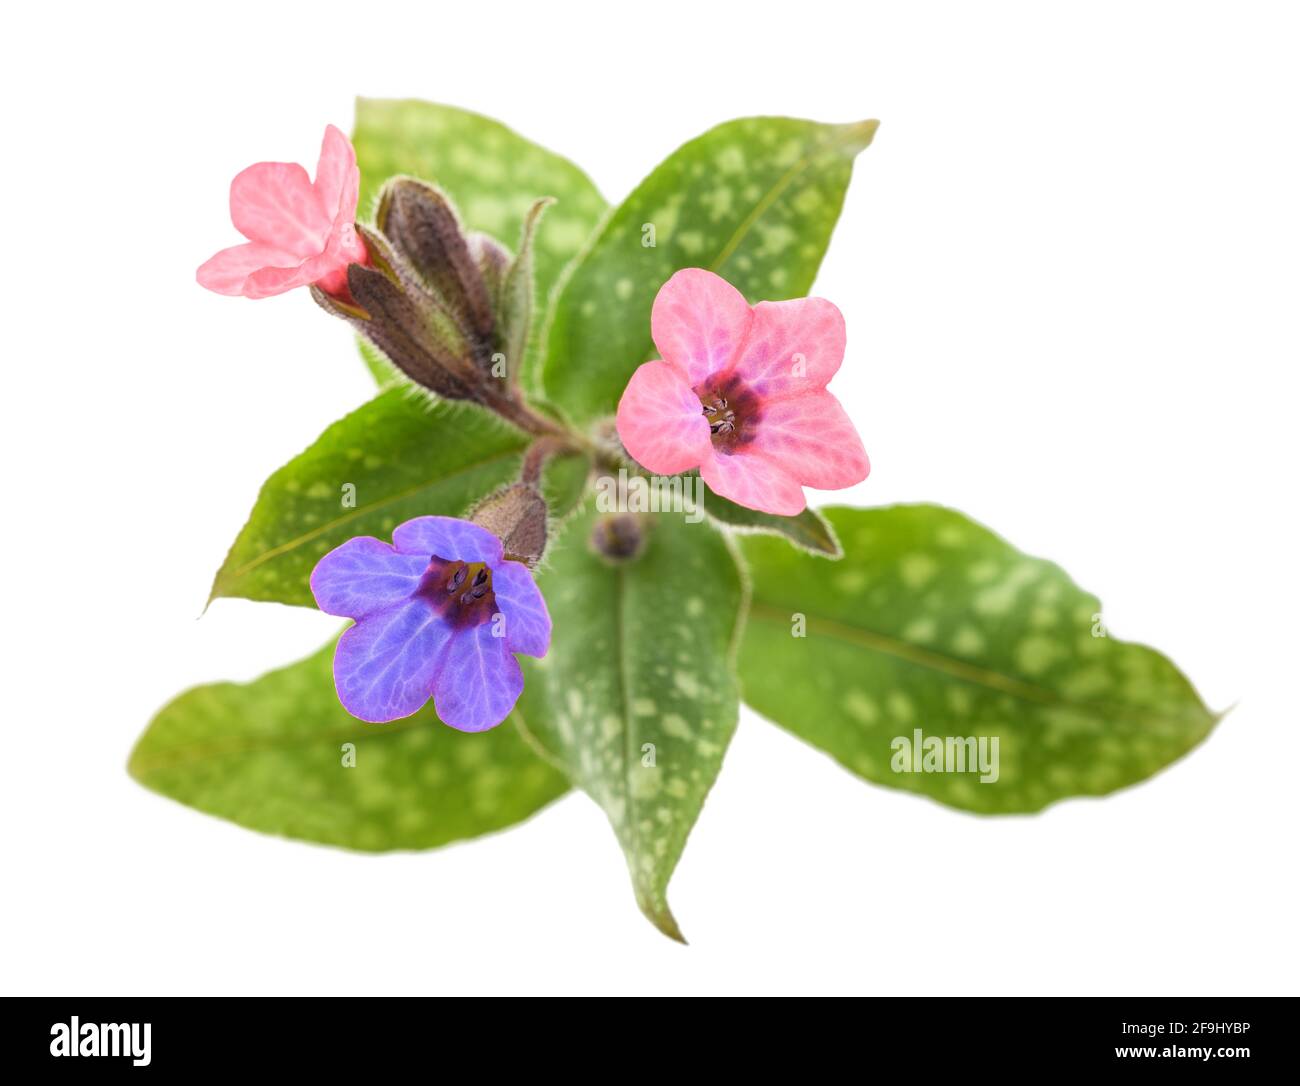 Common lungwort (Pulmonaria officinalis) isolated on white Stock Photo